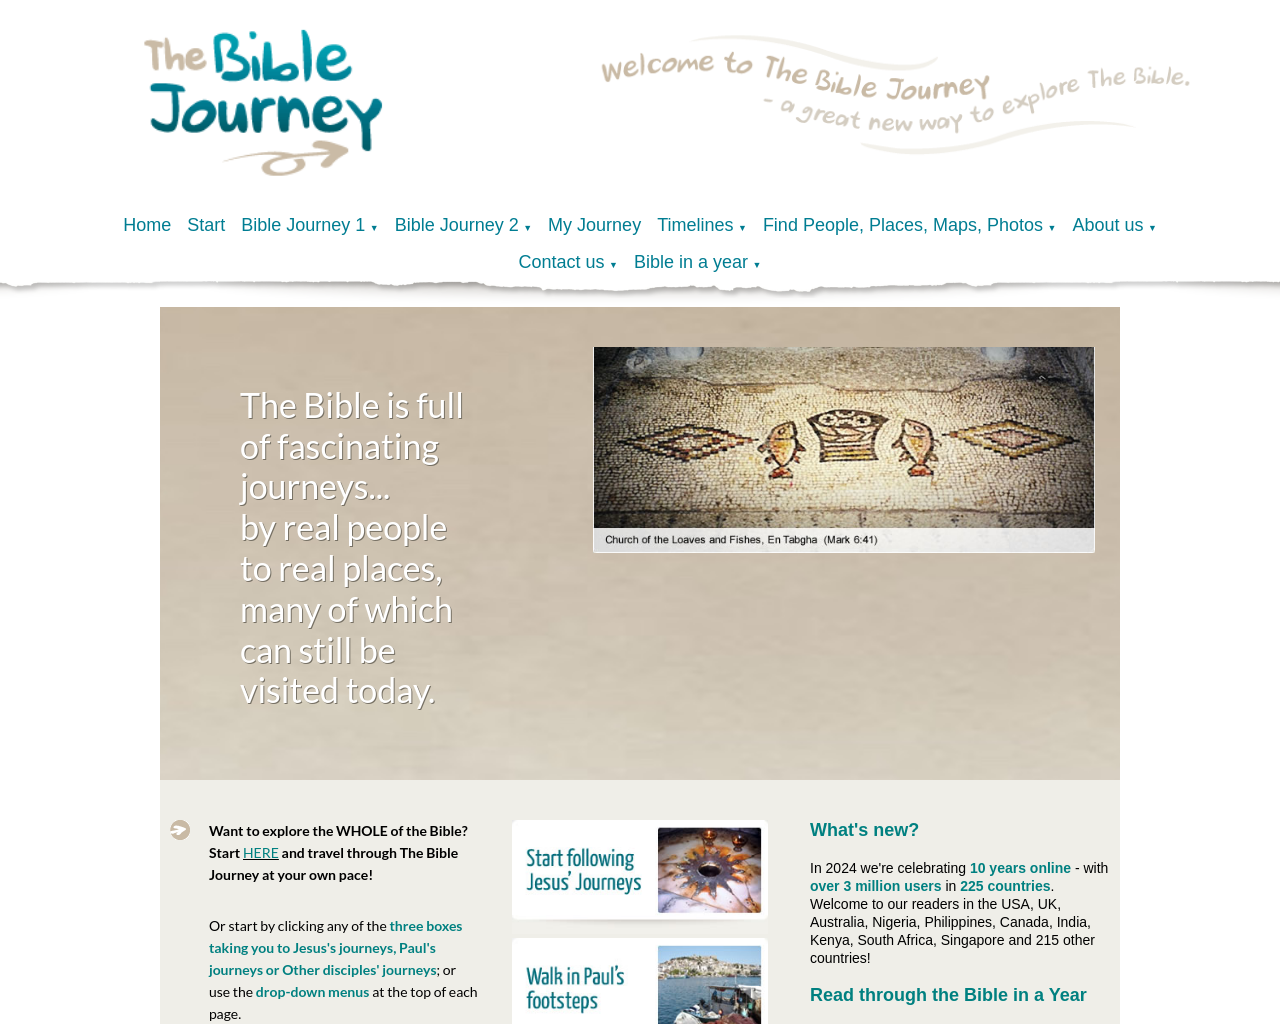 thebiblejourney.org